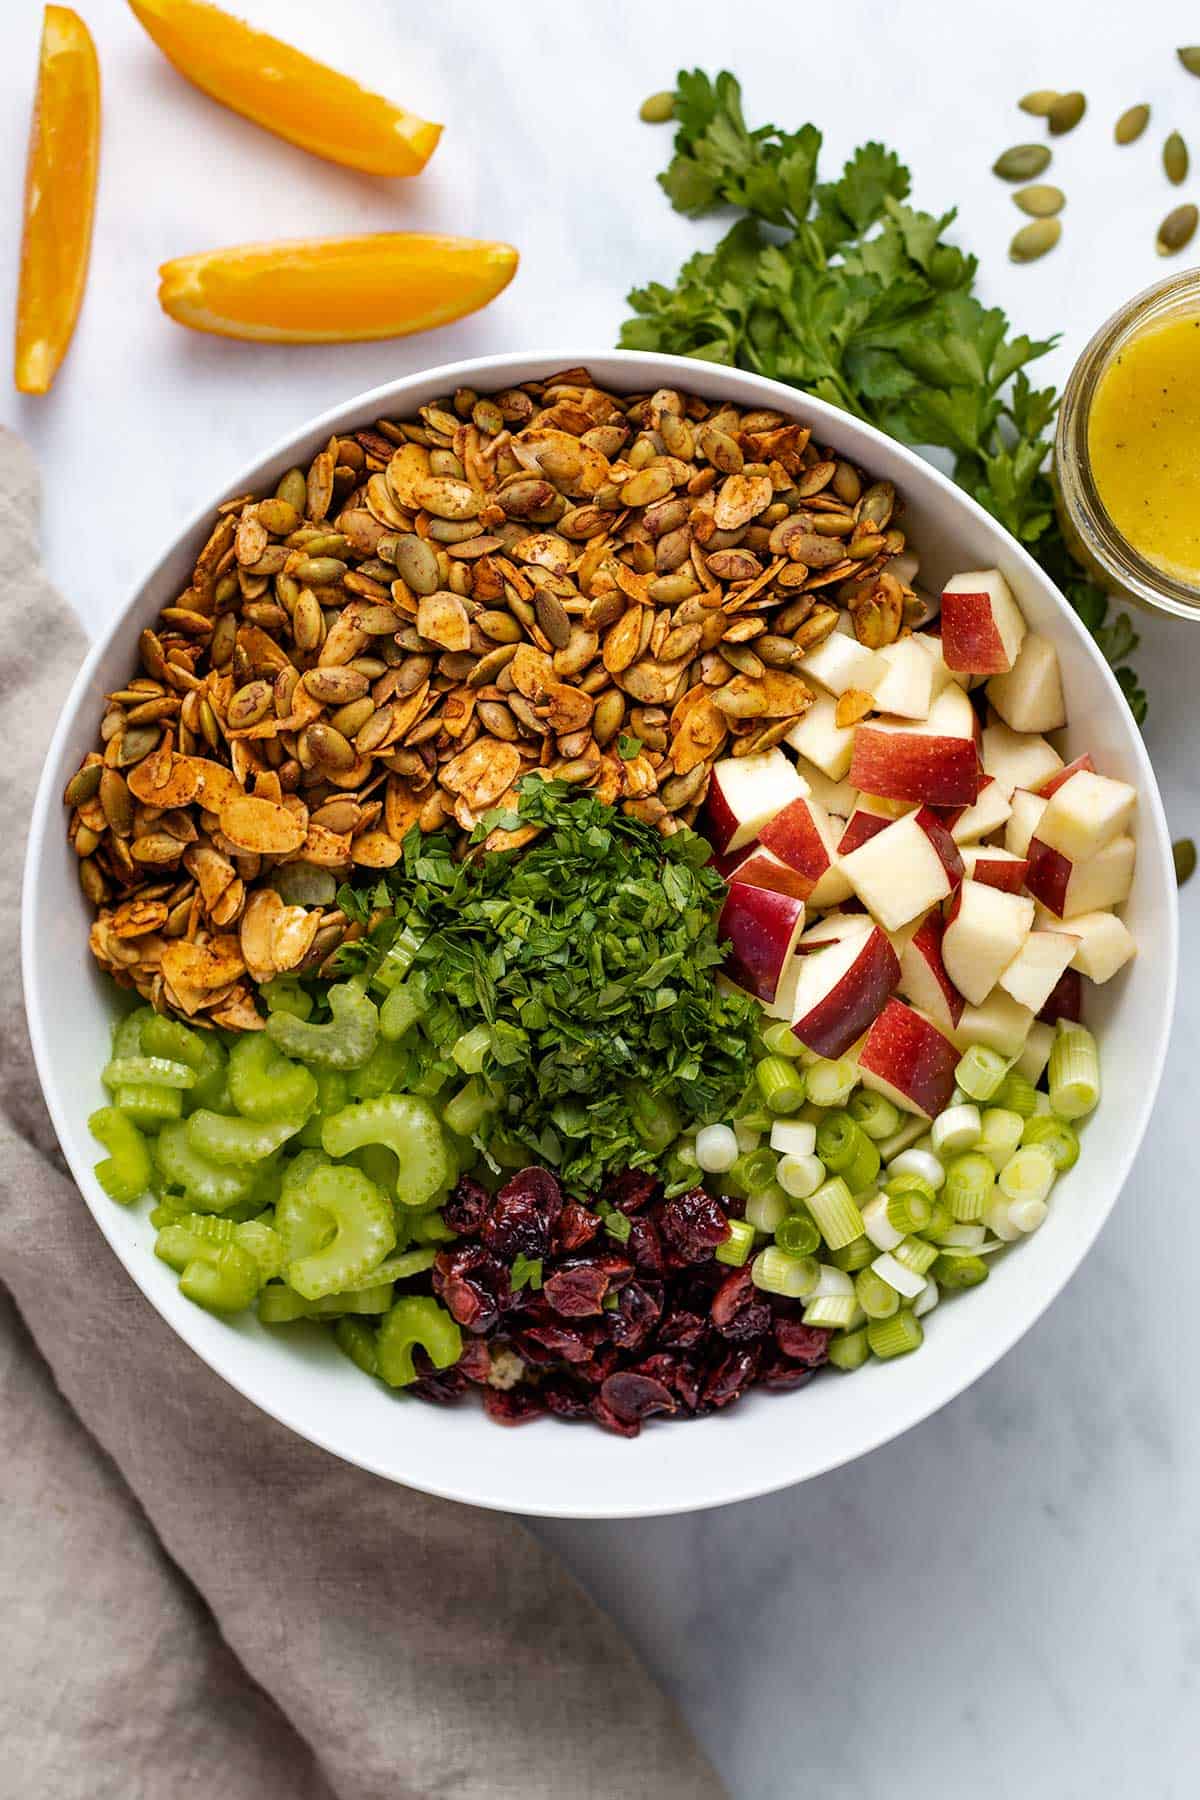 diced apple, sliced green onion, dried cranberries, chopped parsley, diced celery, roasted almond and pumpkin seeds in a white bowl viewed from overhead, next to a mason jar of dressing, a bunch of parsley and 3 orange slices